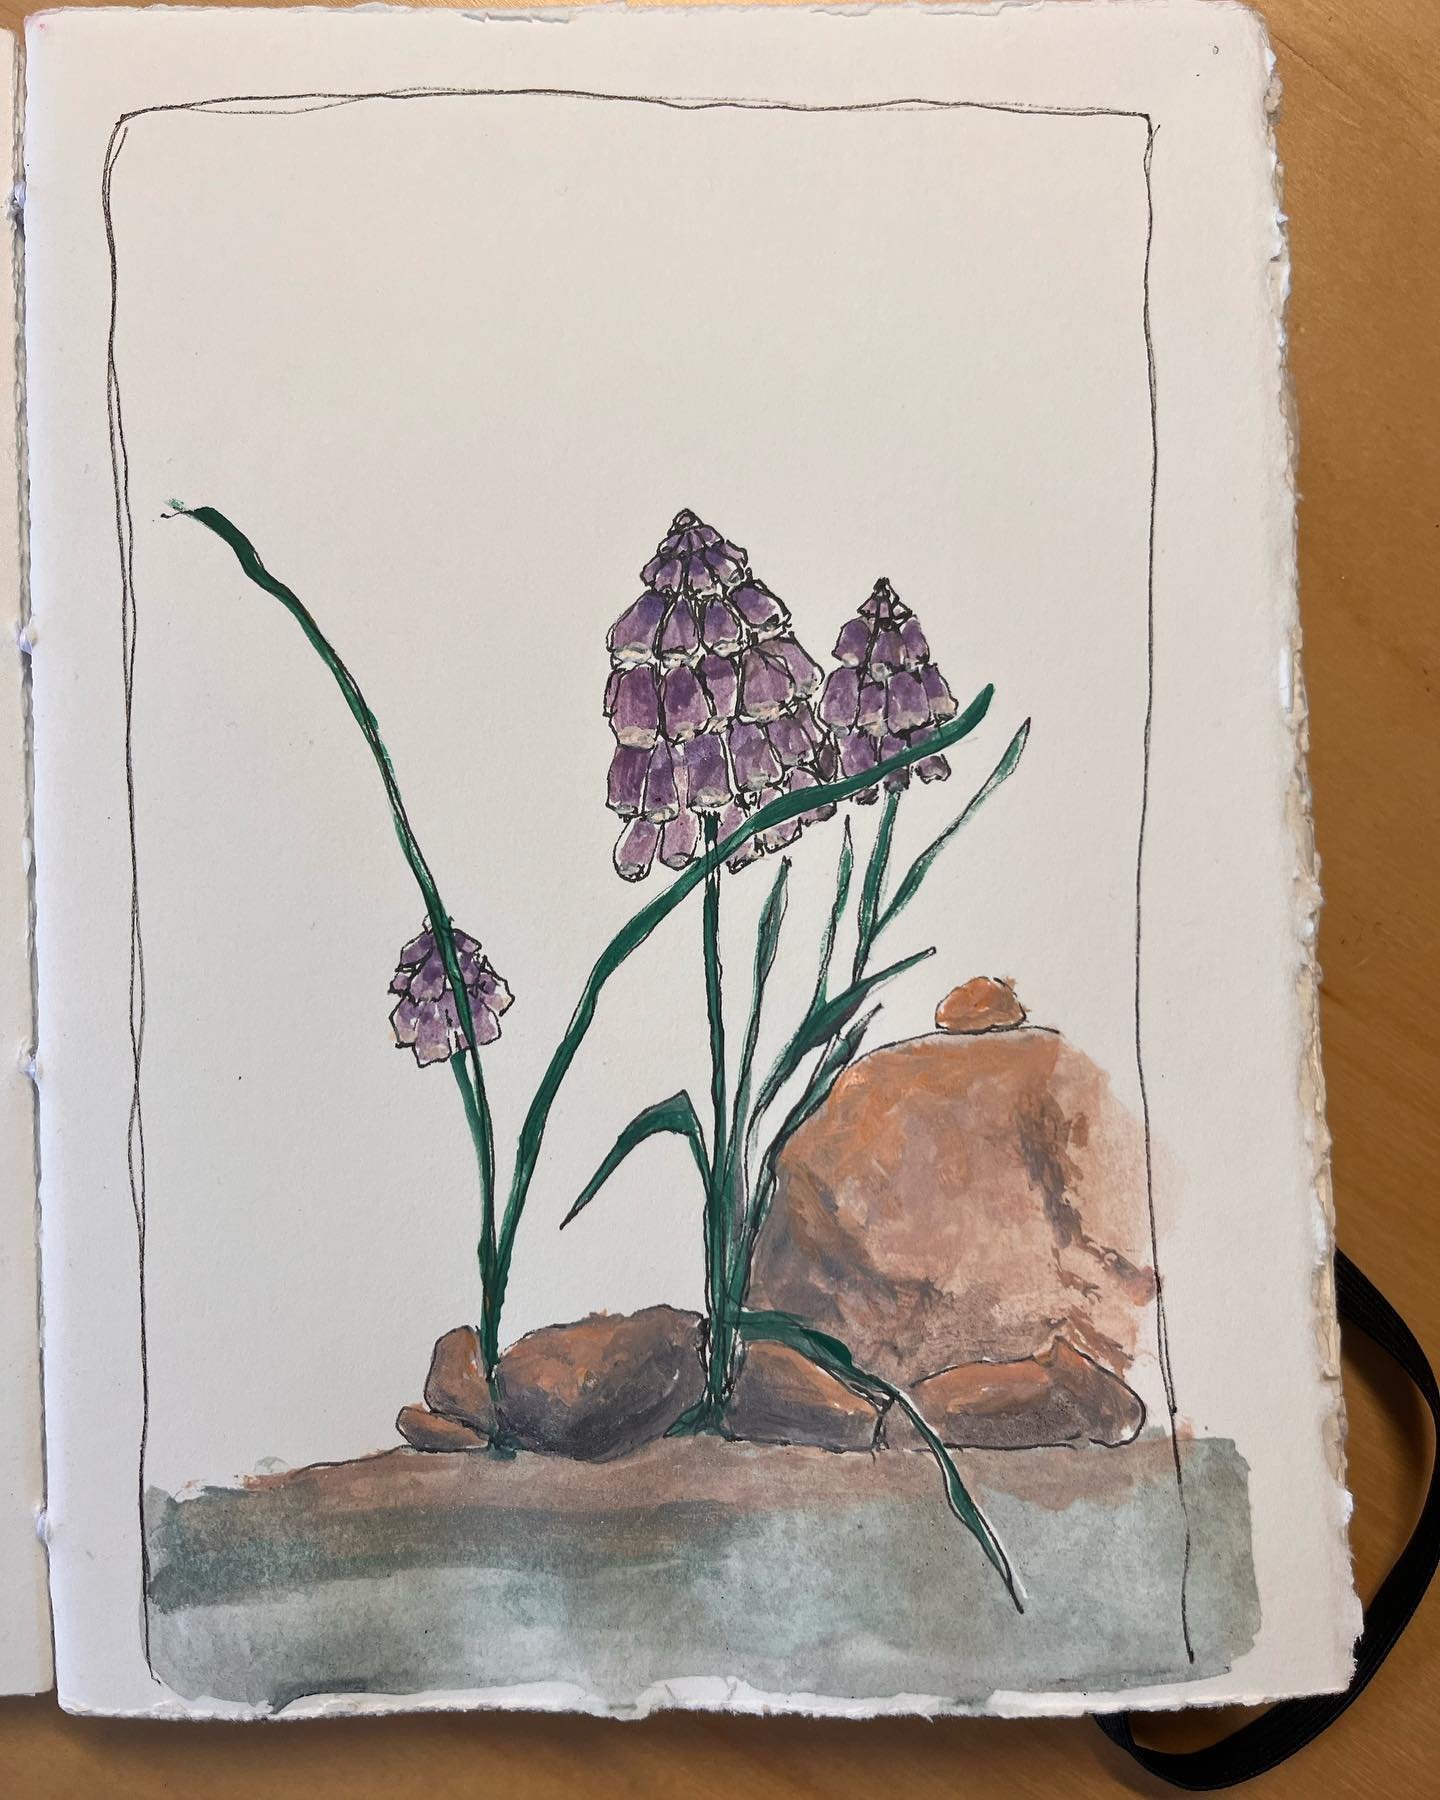 Inspired by this wee grape hyacinth growing among the rocks. 

#penandacrylic #springflowers #sketchdaily